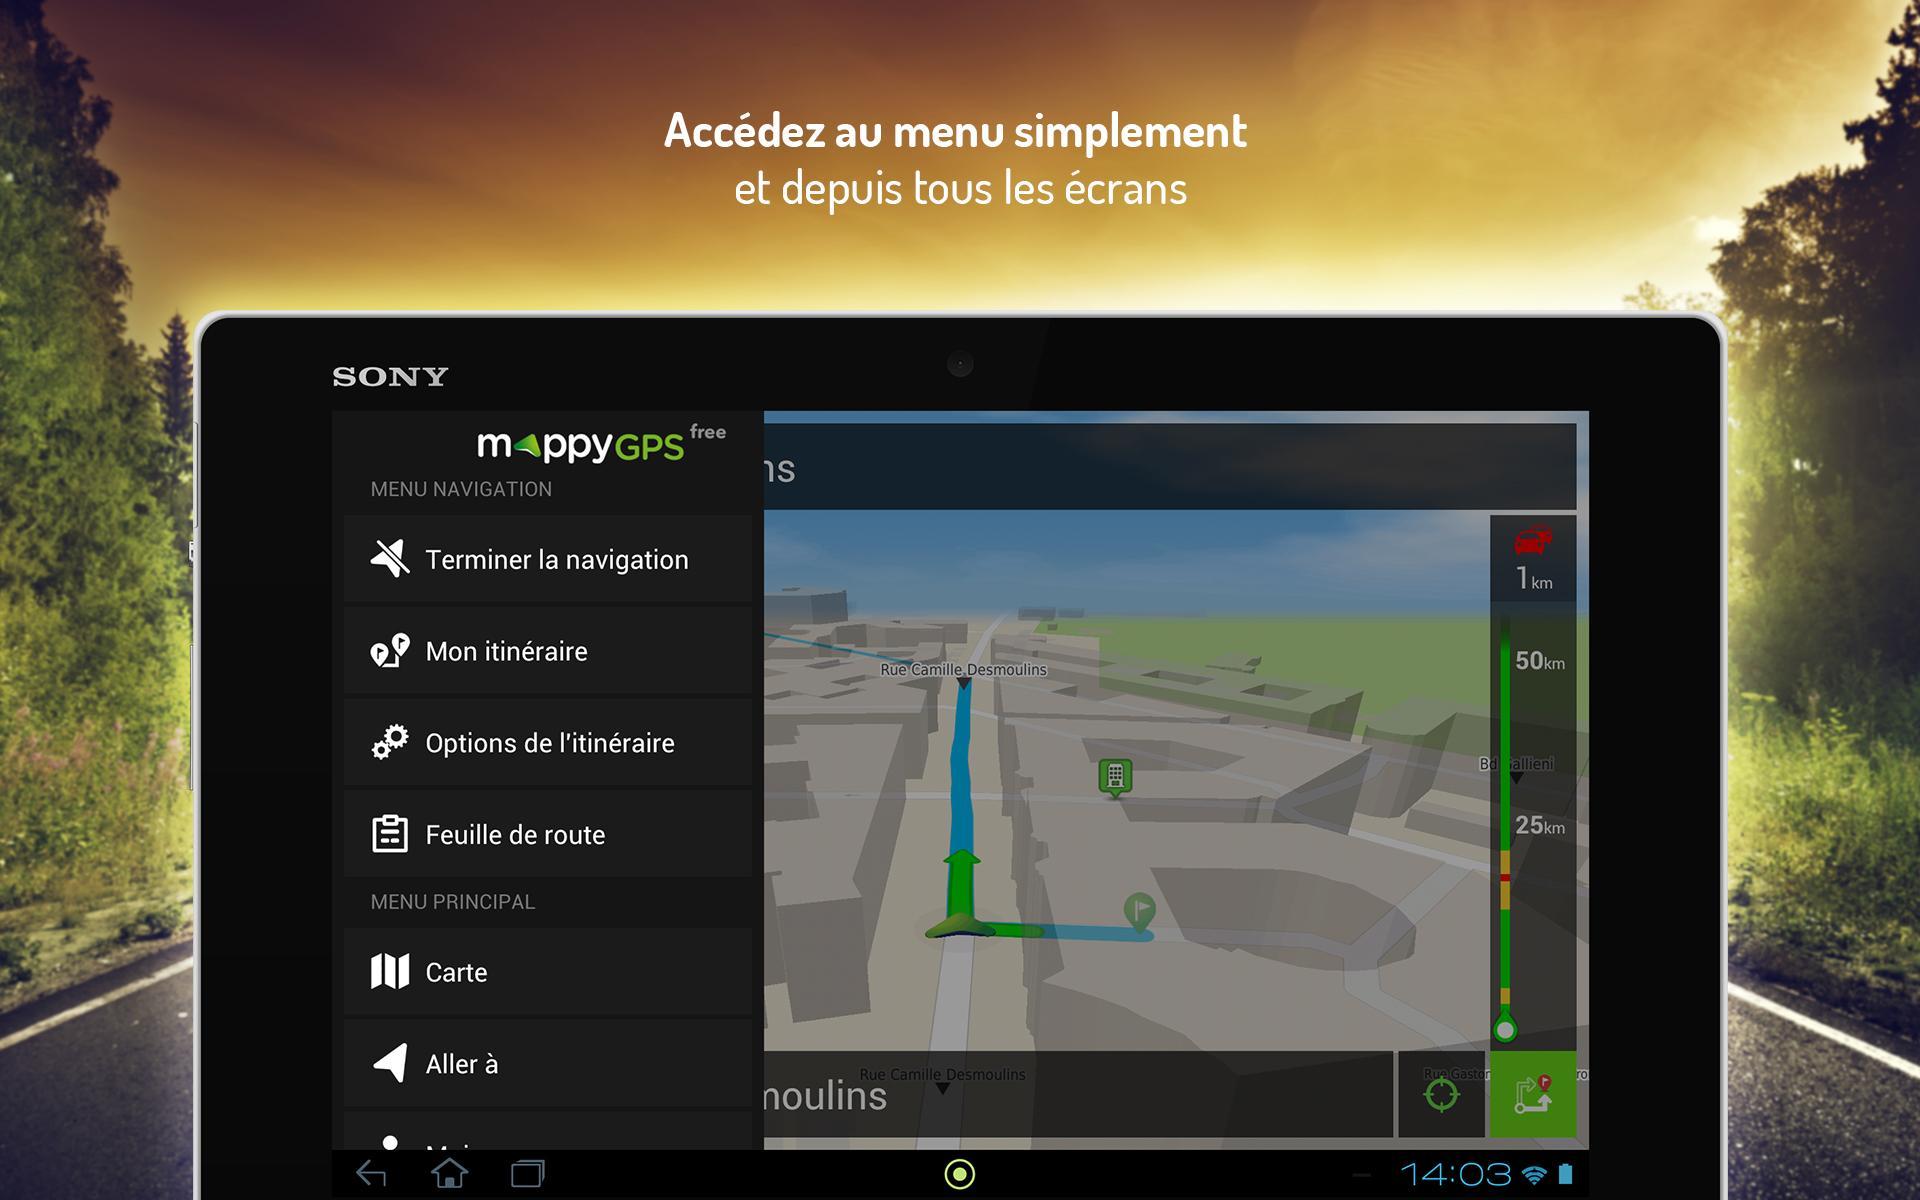 Mappy GPS Free for Android - APK Download